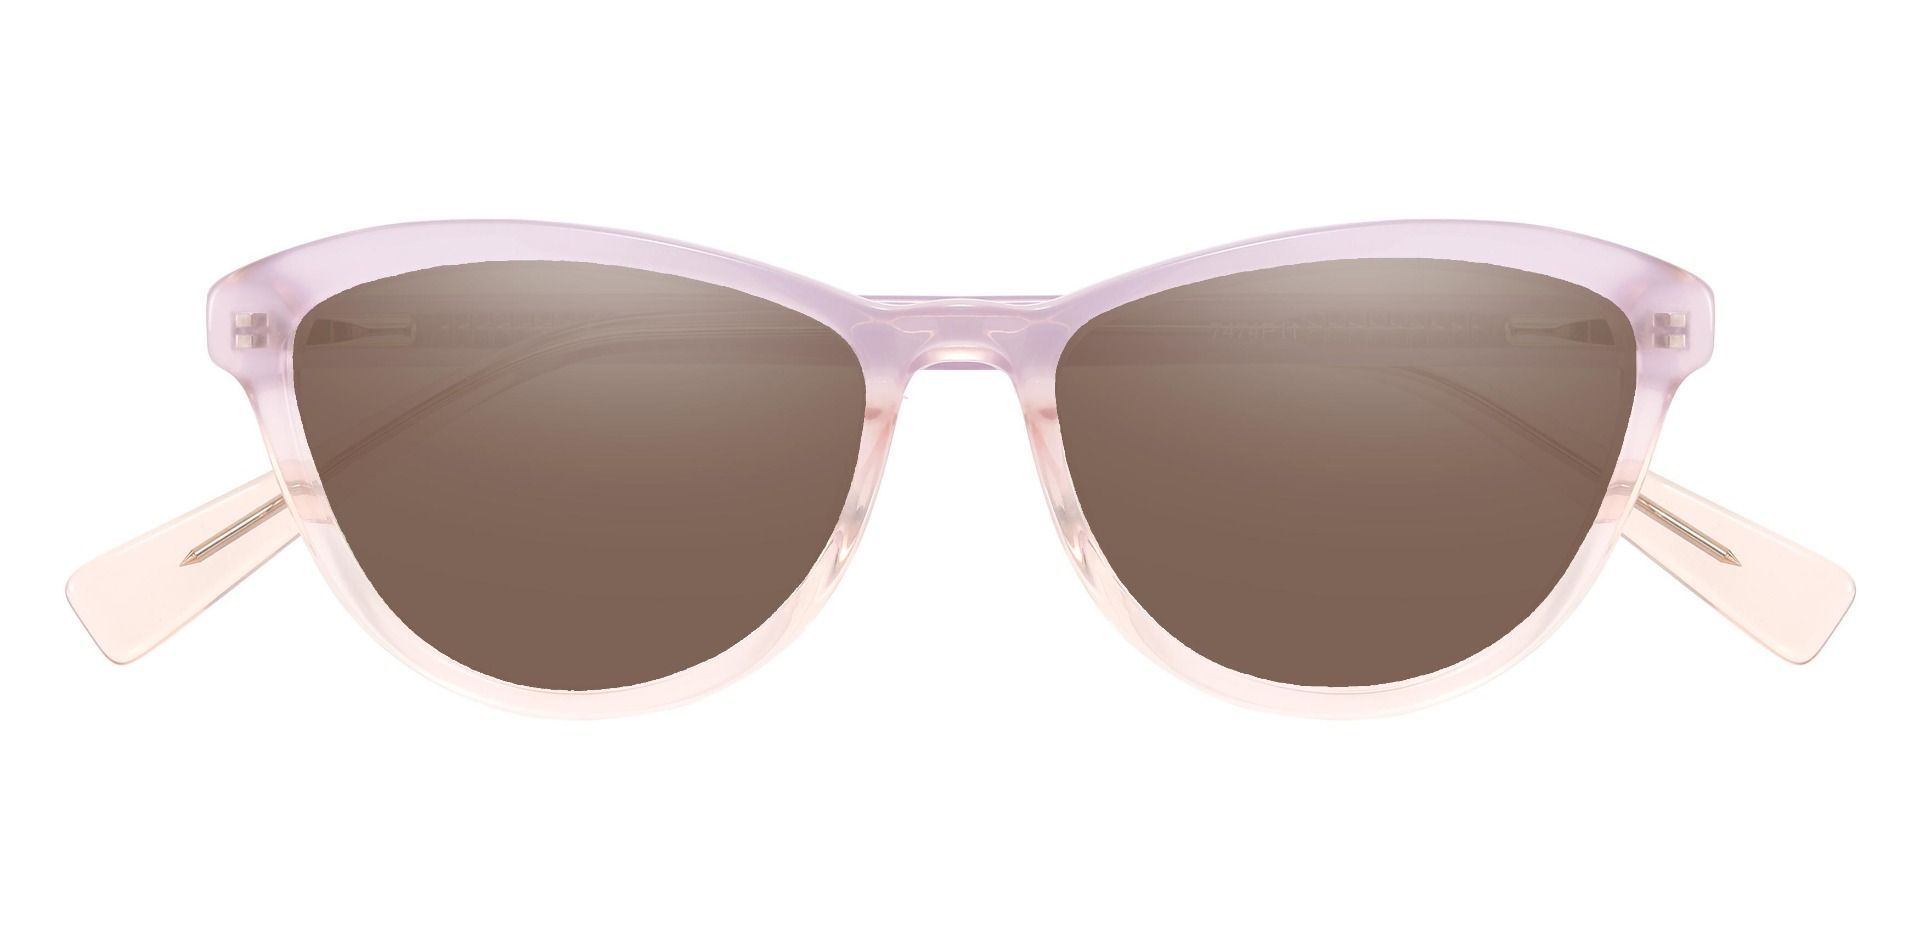 Bexley Cat Eye Non-Rx Sunglasses - Pink Frame With Brown Lenses